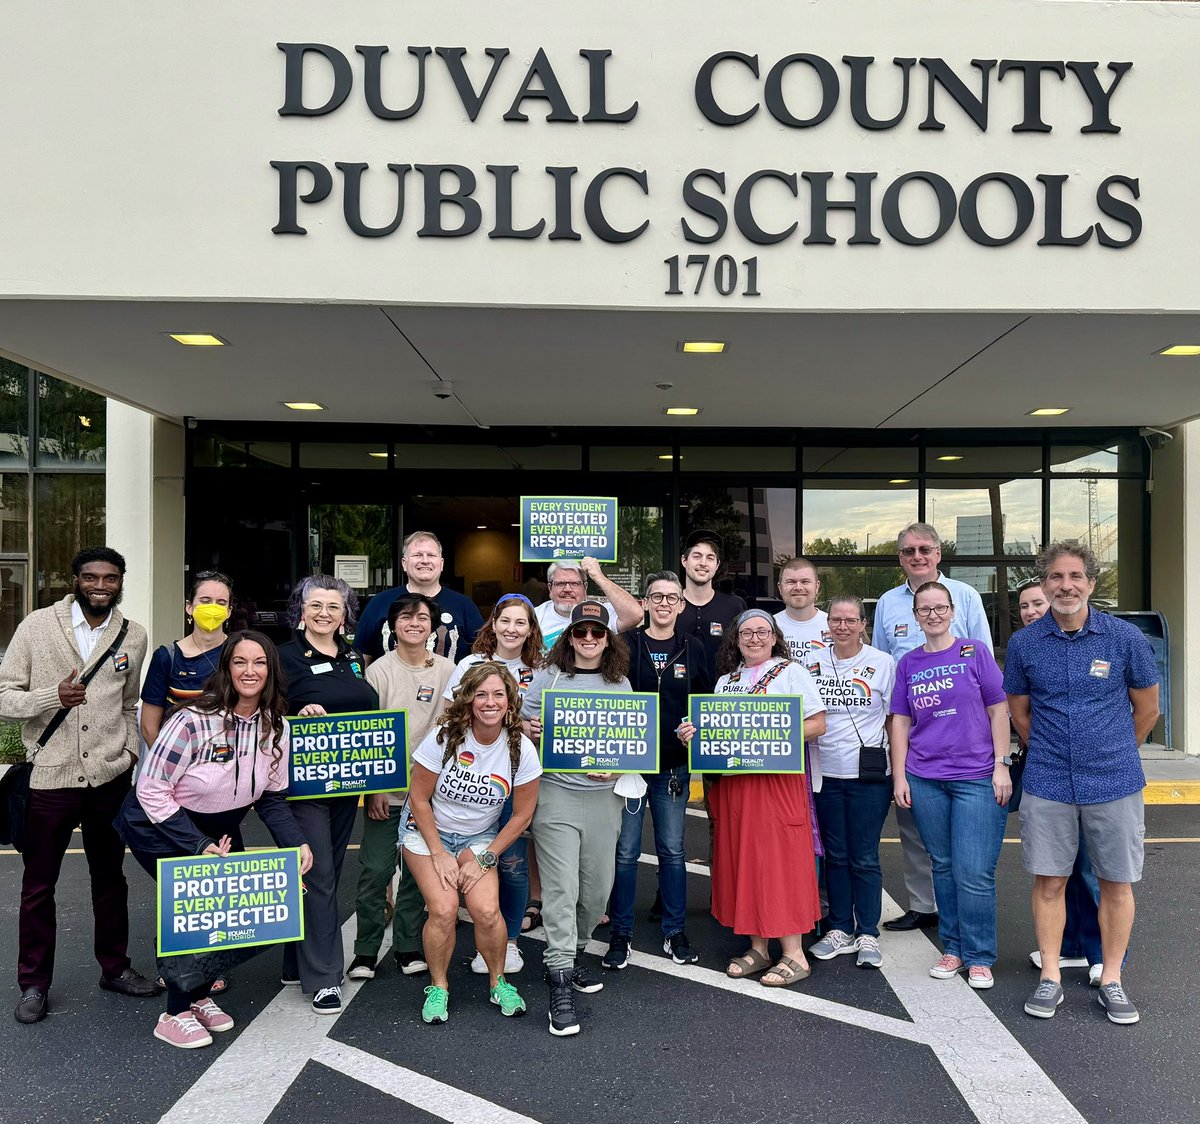 @Pink @FLFreedomRead @ncacensorship @UABookBans @EveryLibrary @diversebooks @BookRiot @ACLU_SC @LetUtahRead @PENamerica Thank you! We are the #RealMajority of parents, students, teachers, & community members in Jacksonville, Fl. We believe our students & staff deserve safe & inclusive learning environments and we work hard to fight against the extremist takeover of our Public schools.